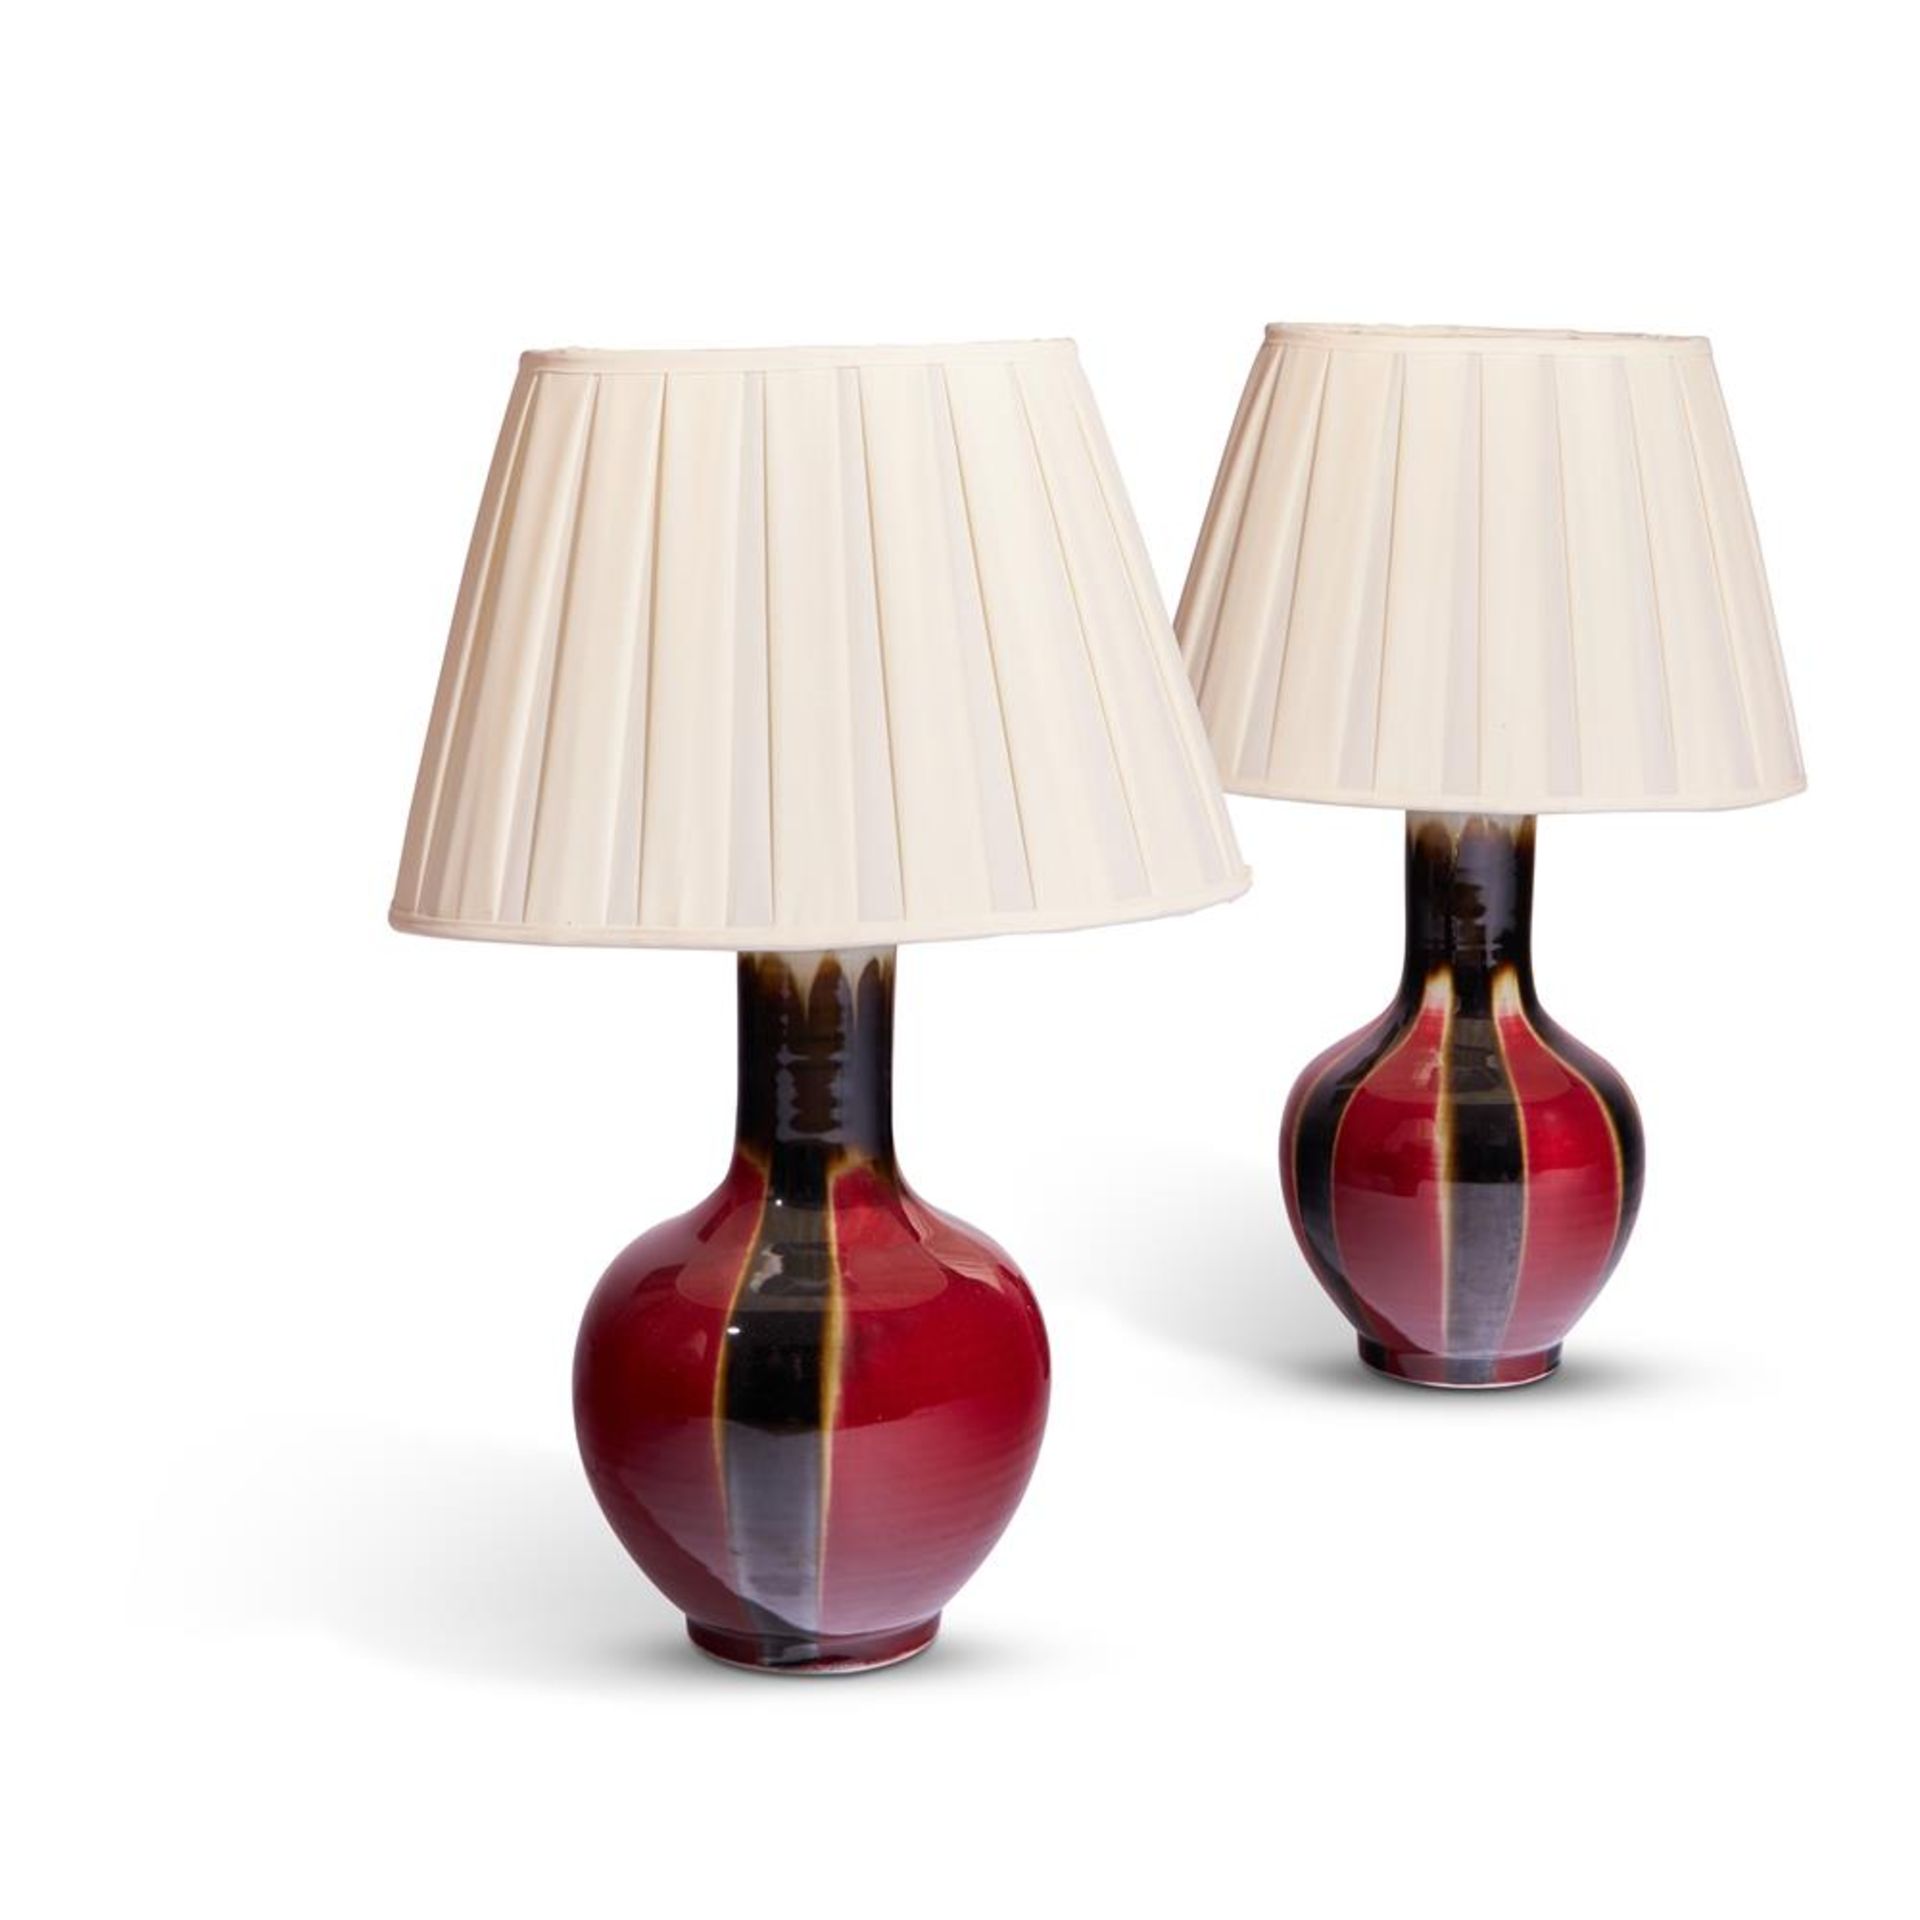 A PAIR OF RED AND BLACK GLAZED CERAMIC LAMPS, MODERN